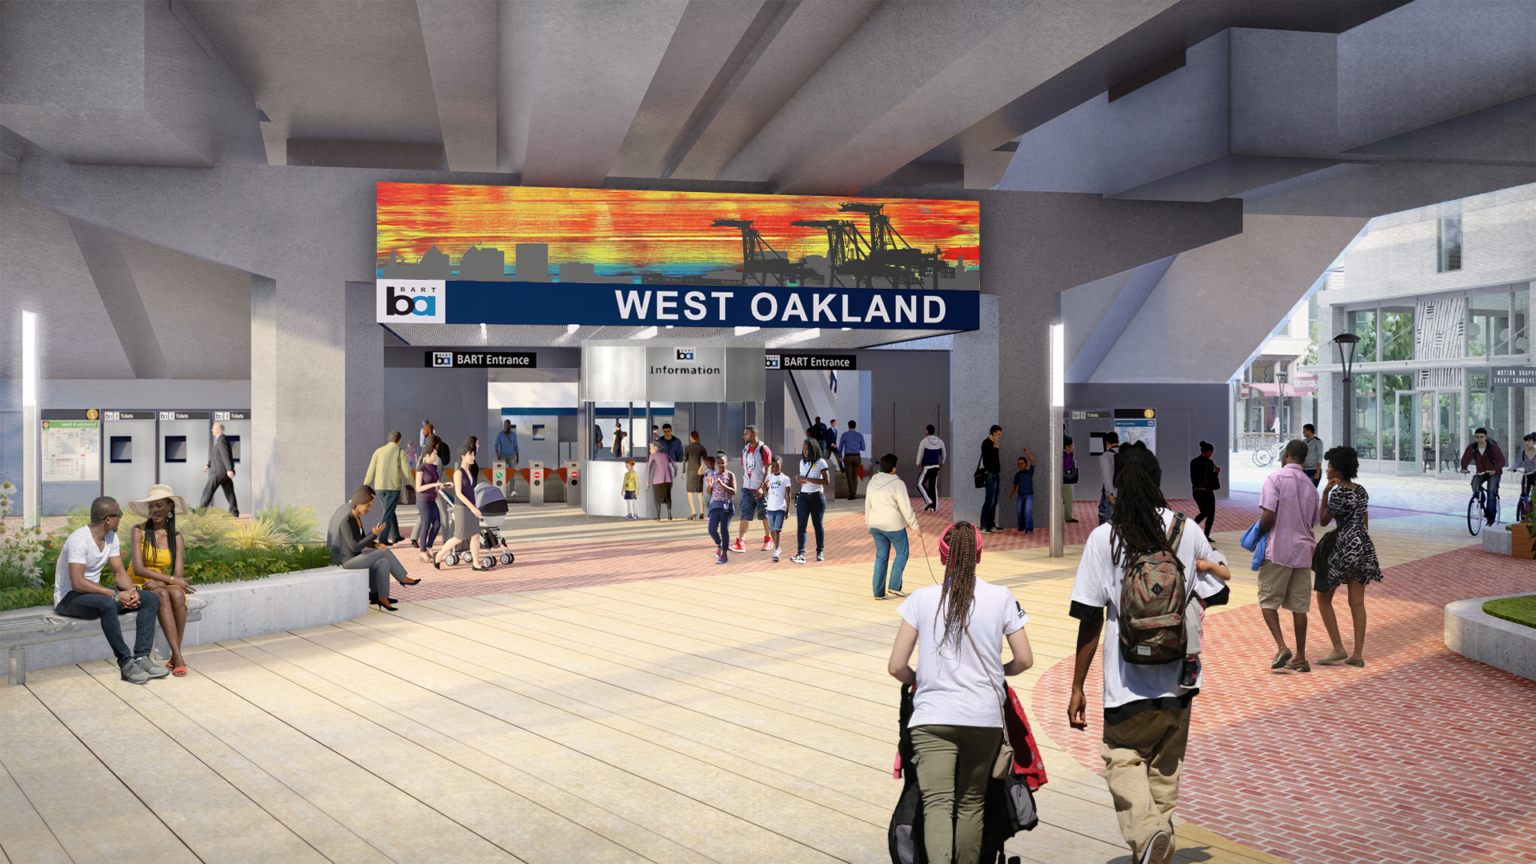 proposed design for the underside of a train rail in west oakland california